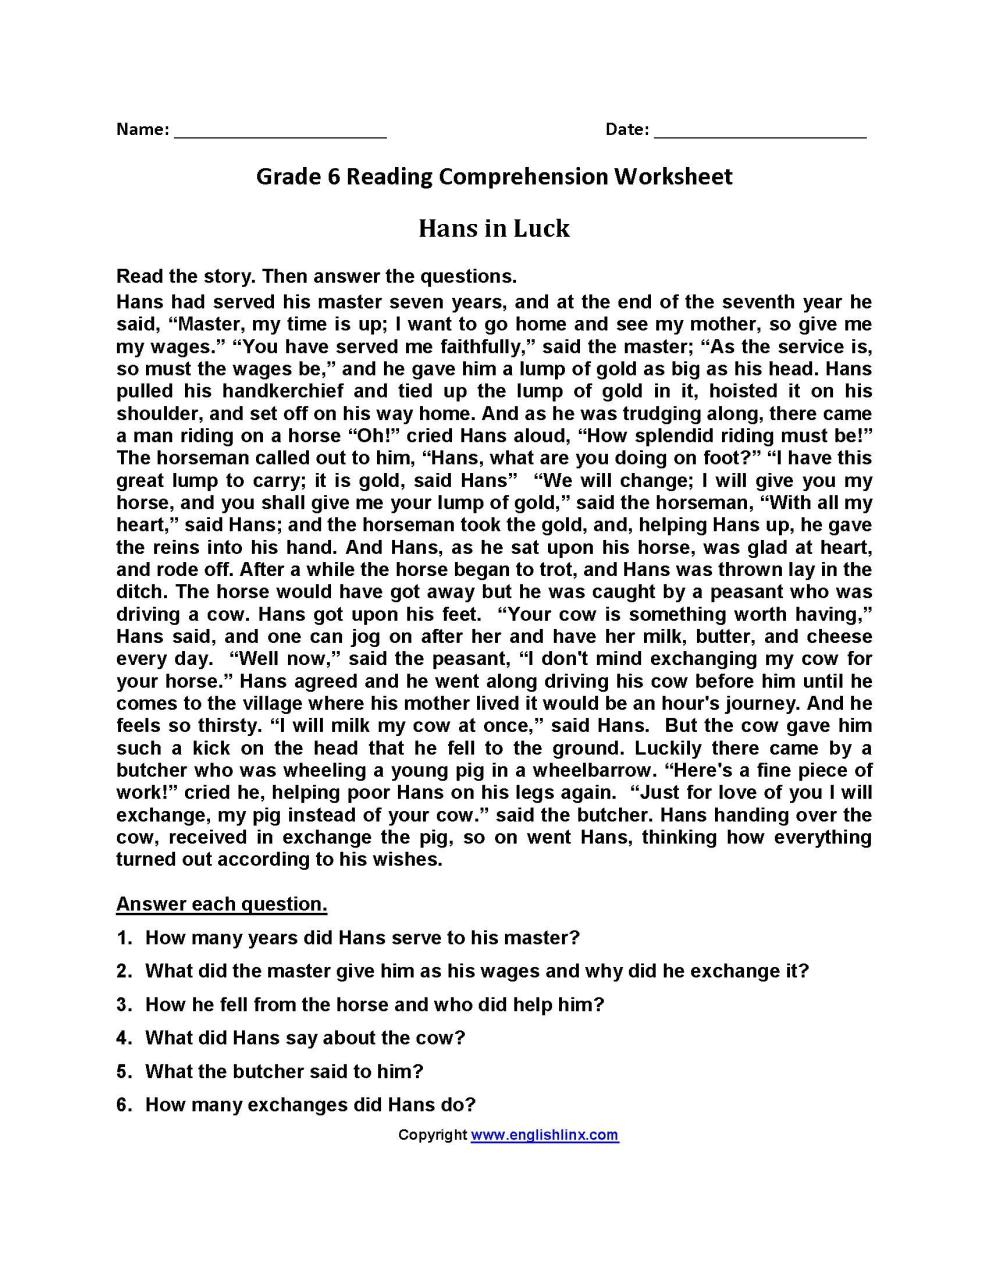 Year 6 Reading Comprehension Worksheets Db Excelcom 6th Grade Year 6 